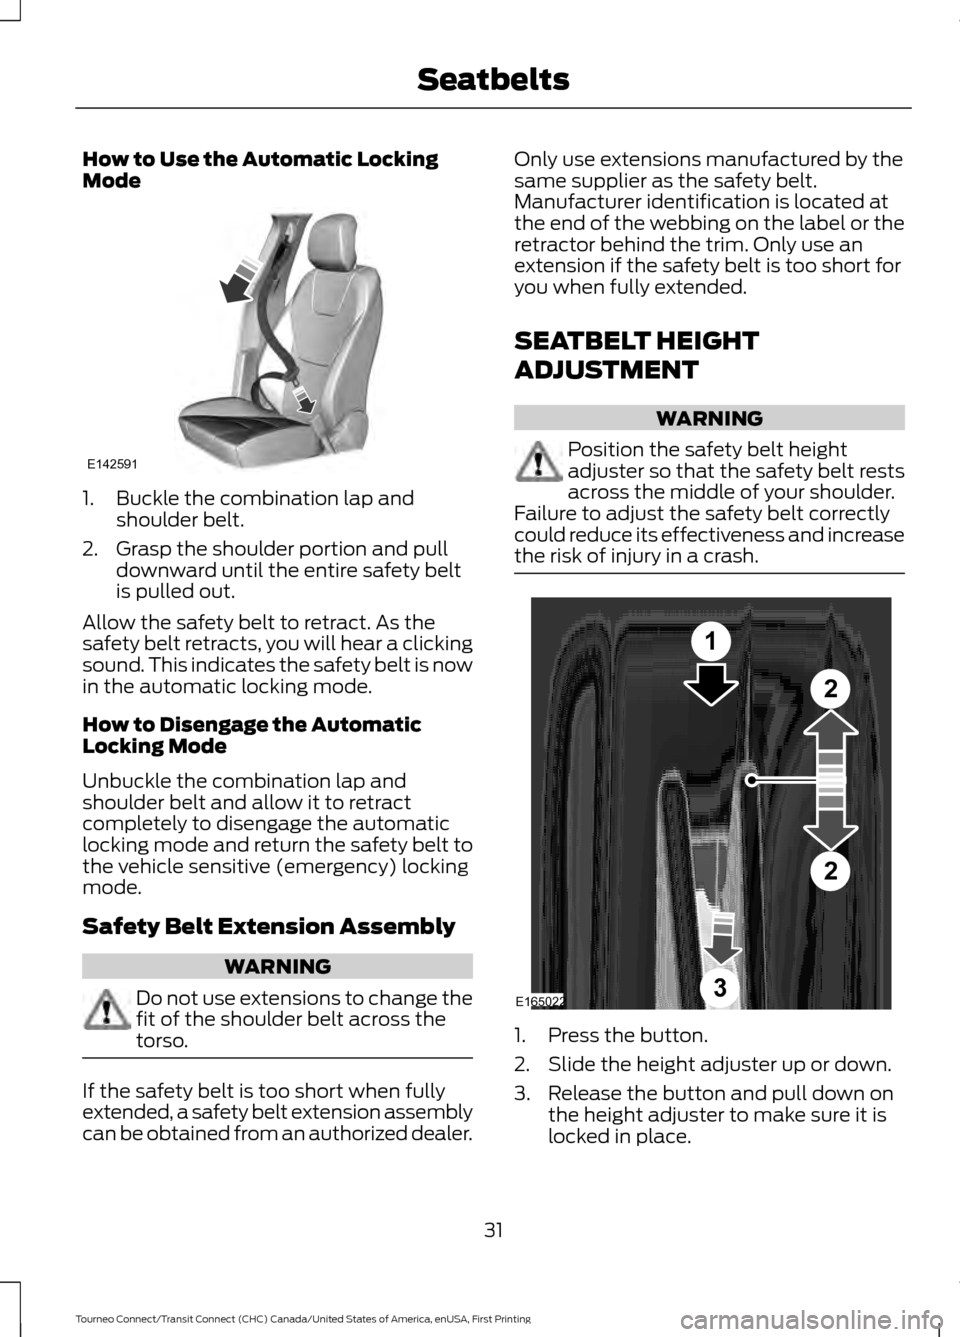 FORD TRANSIT CONNECT 2016 2.G Owners Guide How to Use the Automatic Locking
Mode
1. Buckle the combination lap and
shoulder belt.
2. Grasp the shoulder portion and pull downward until the entire safety belt
is pulled out.
Allow the safety belt